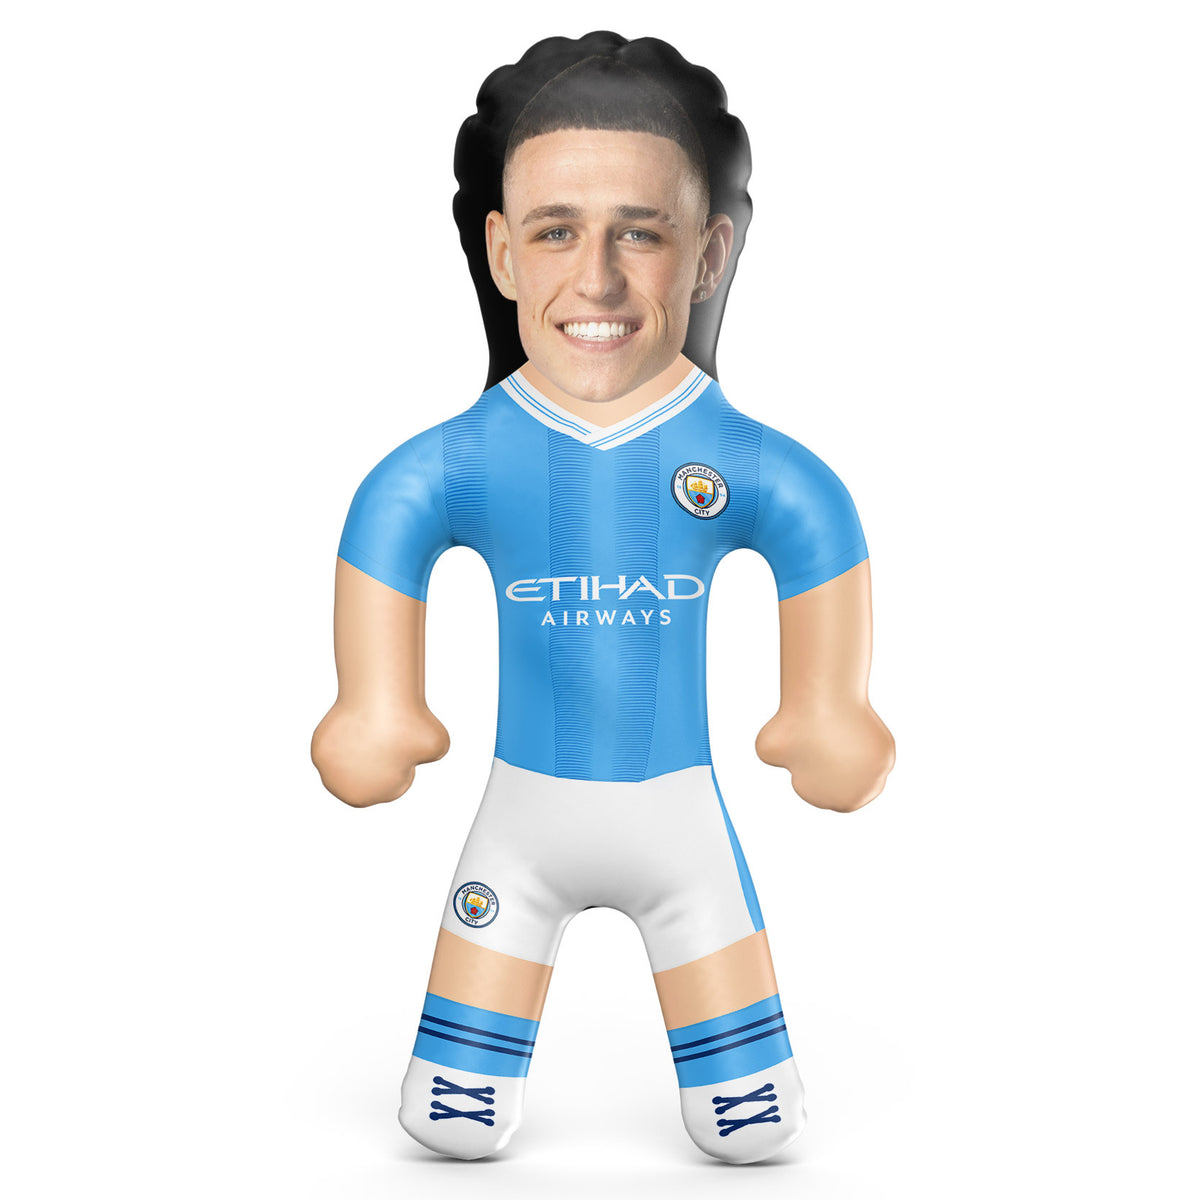 Erling Haaland Manchester City SoccerStarz Mini 2 Inch Figure Officially  License